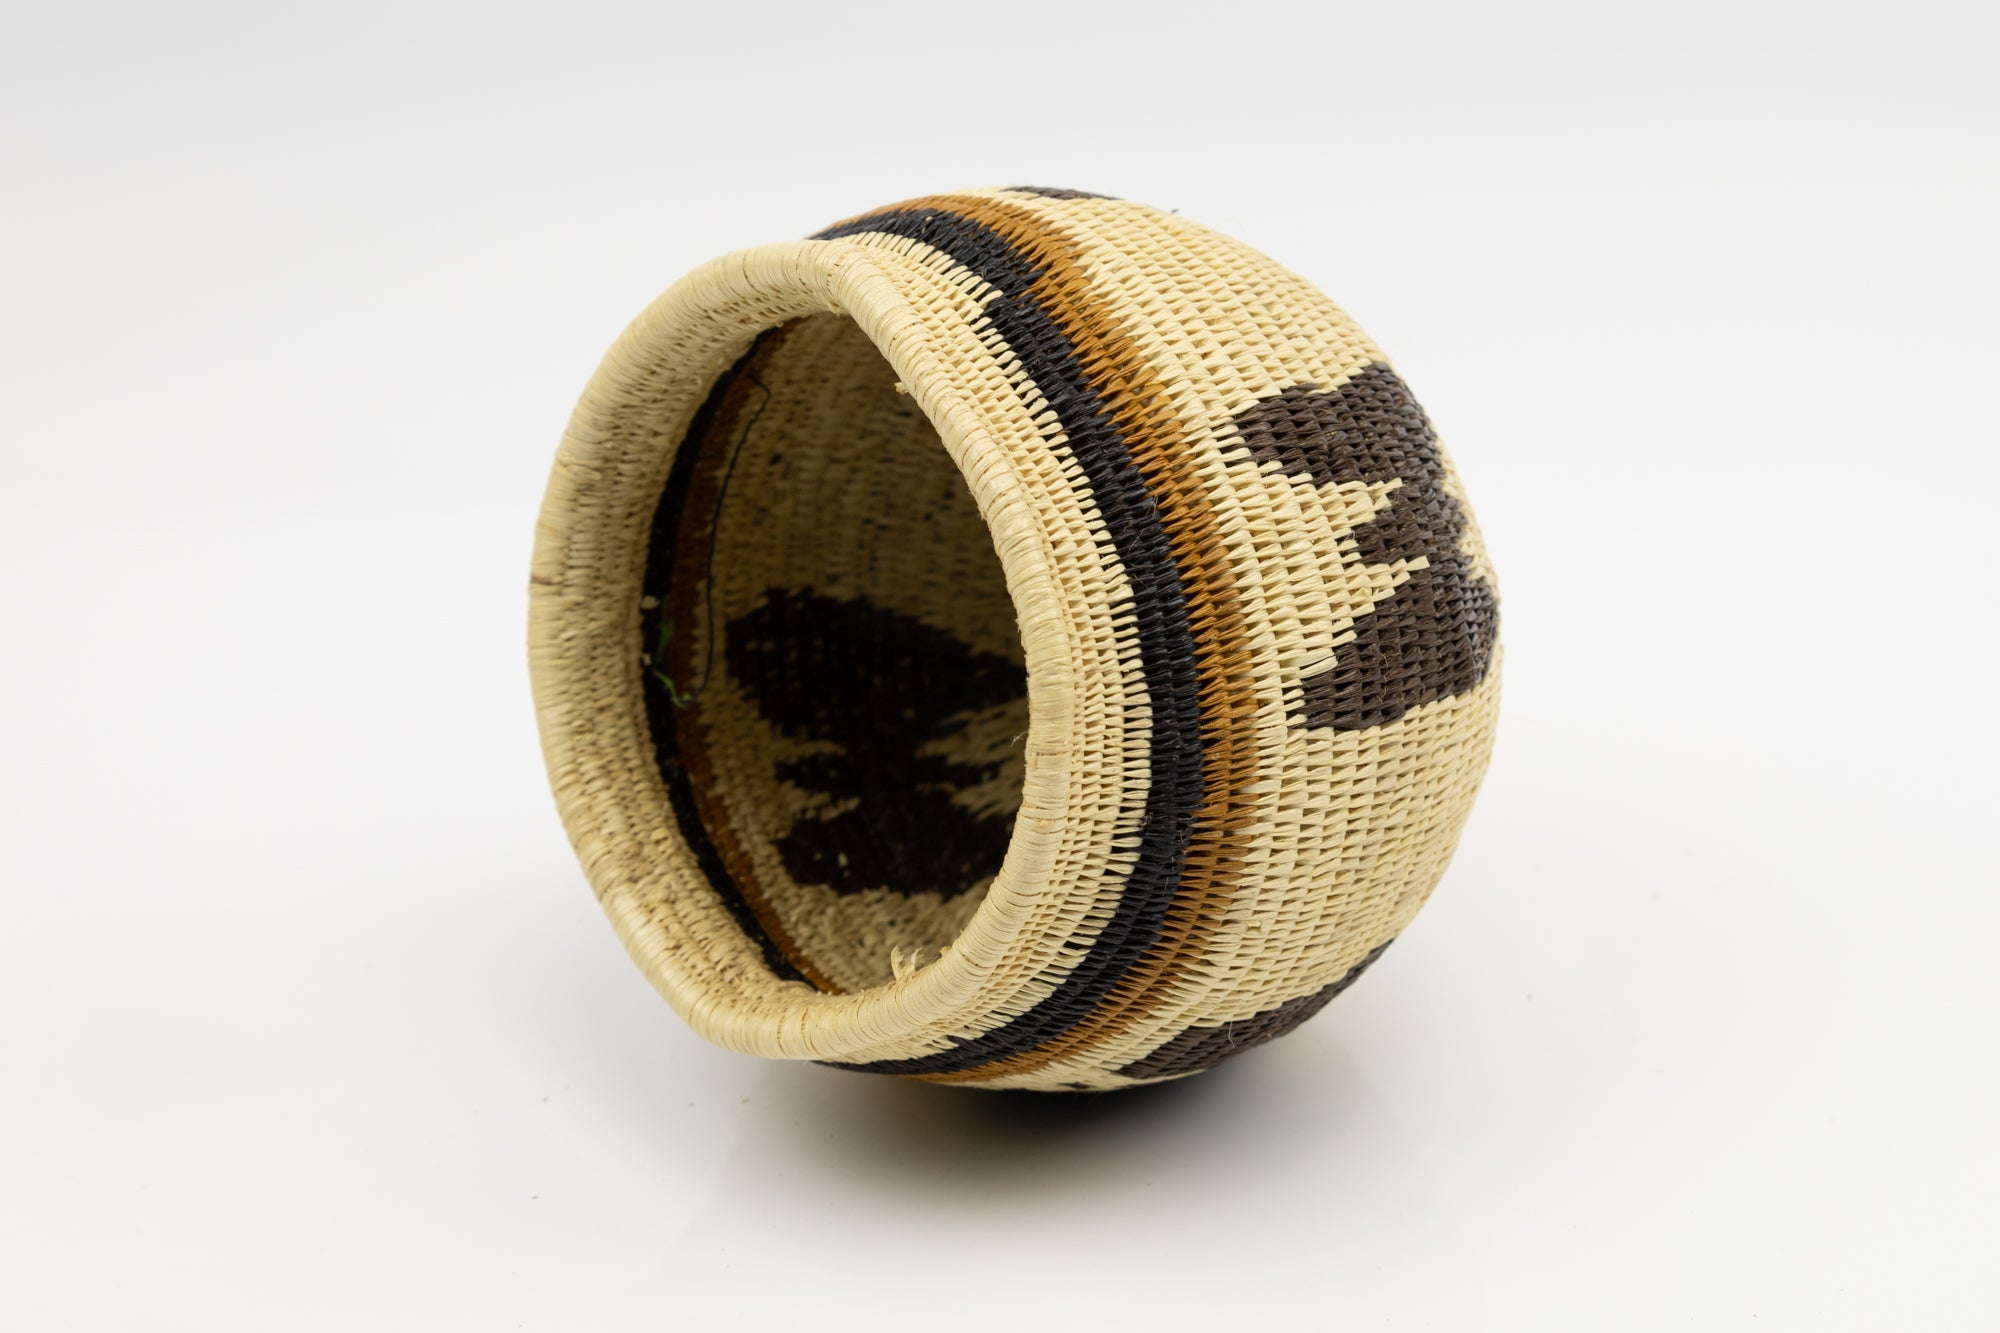 Hand Woven Vintage Butterfly Basket Made By Indigenous Artisans